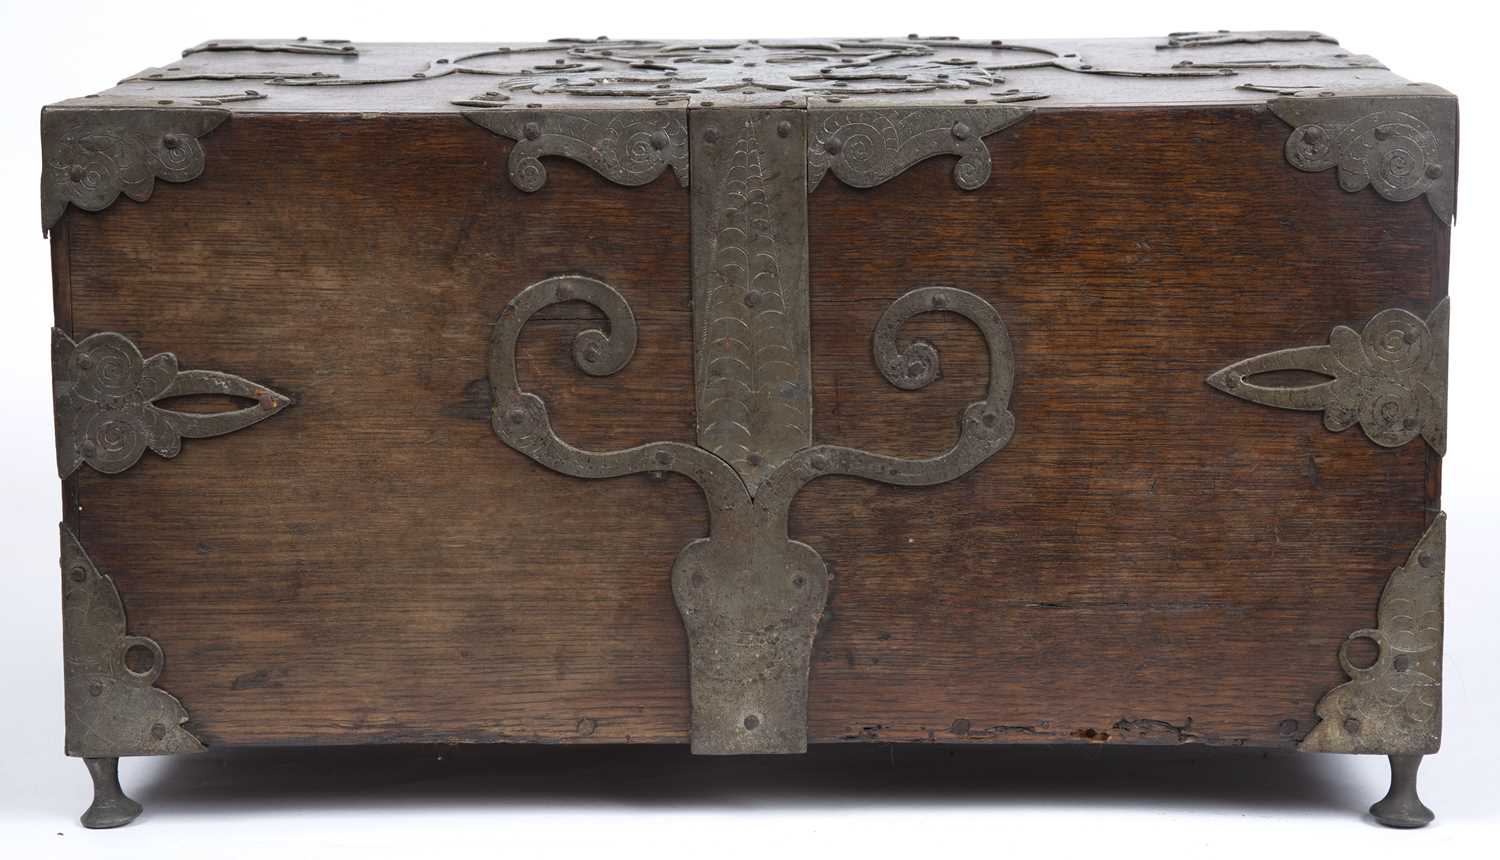 A 17th century German oak and metal bound table top cabinet of drawers, having a double headed eagle - Image 6 of 10